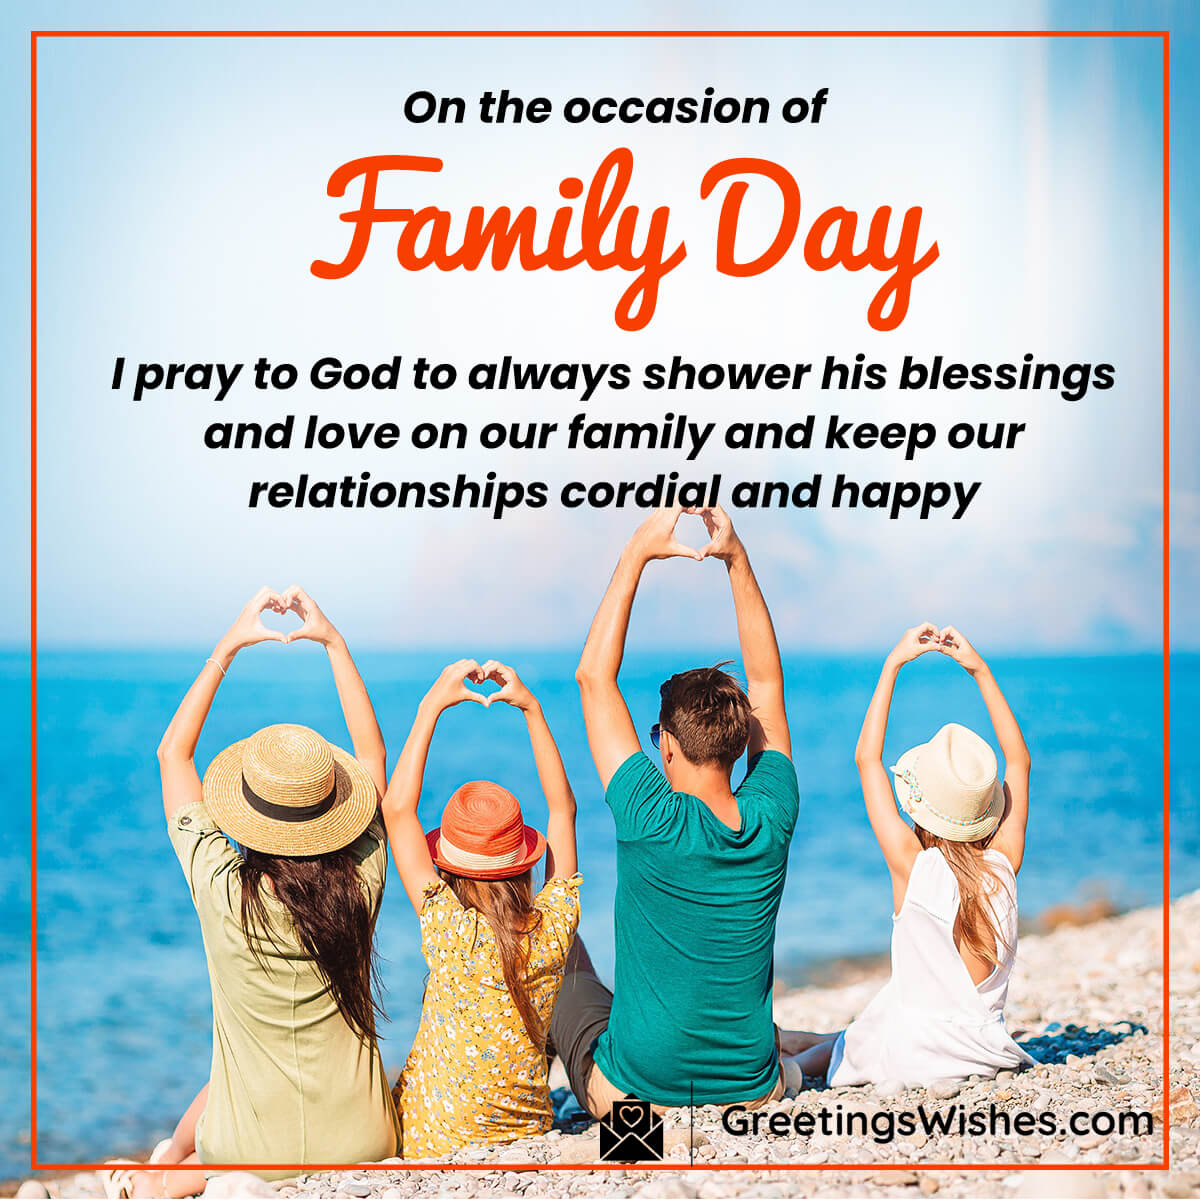 International Day of Families Wishes (15th May) - Greetings Wishes